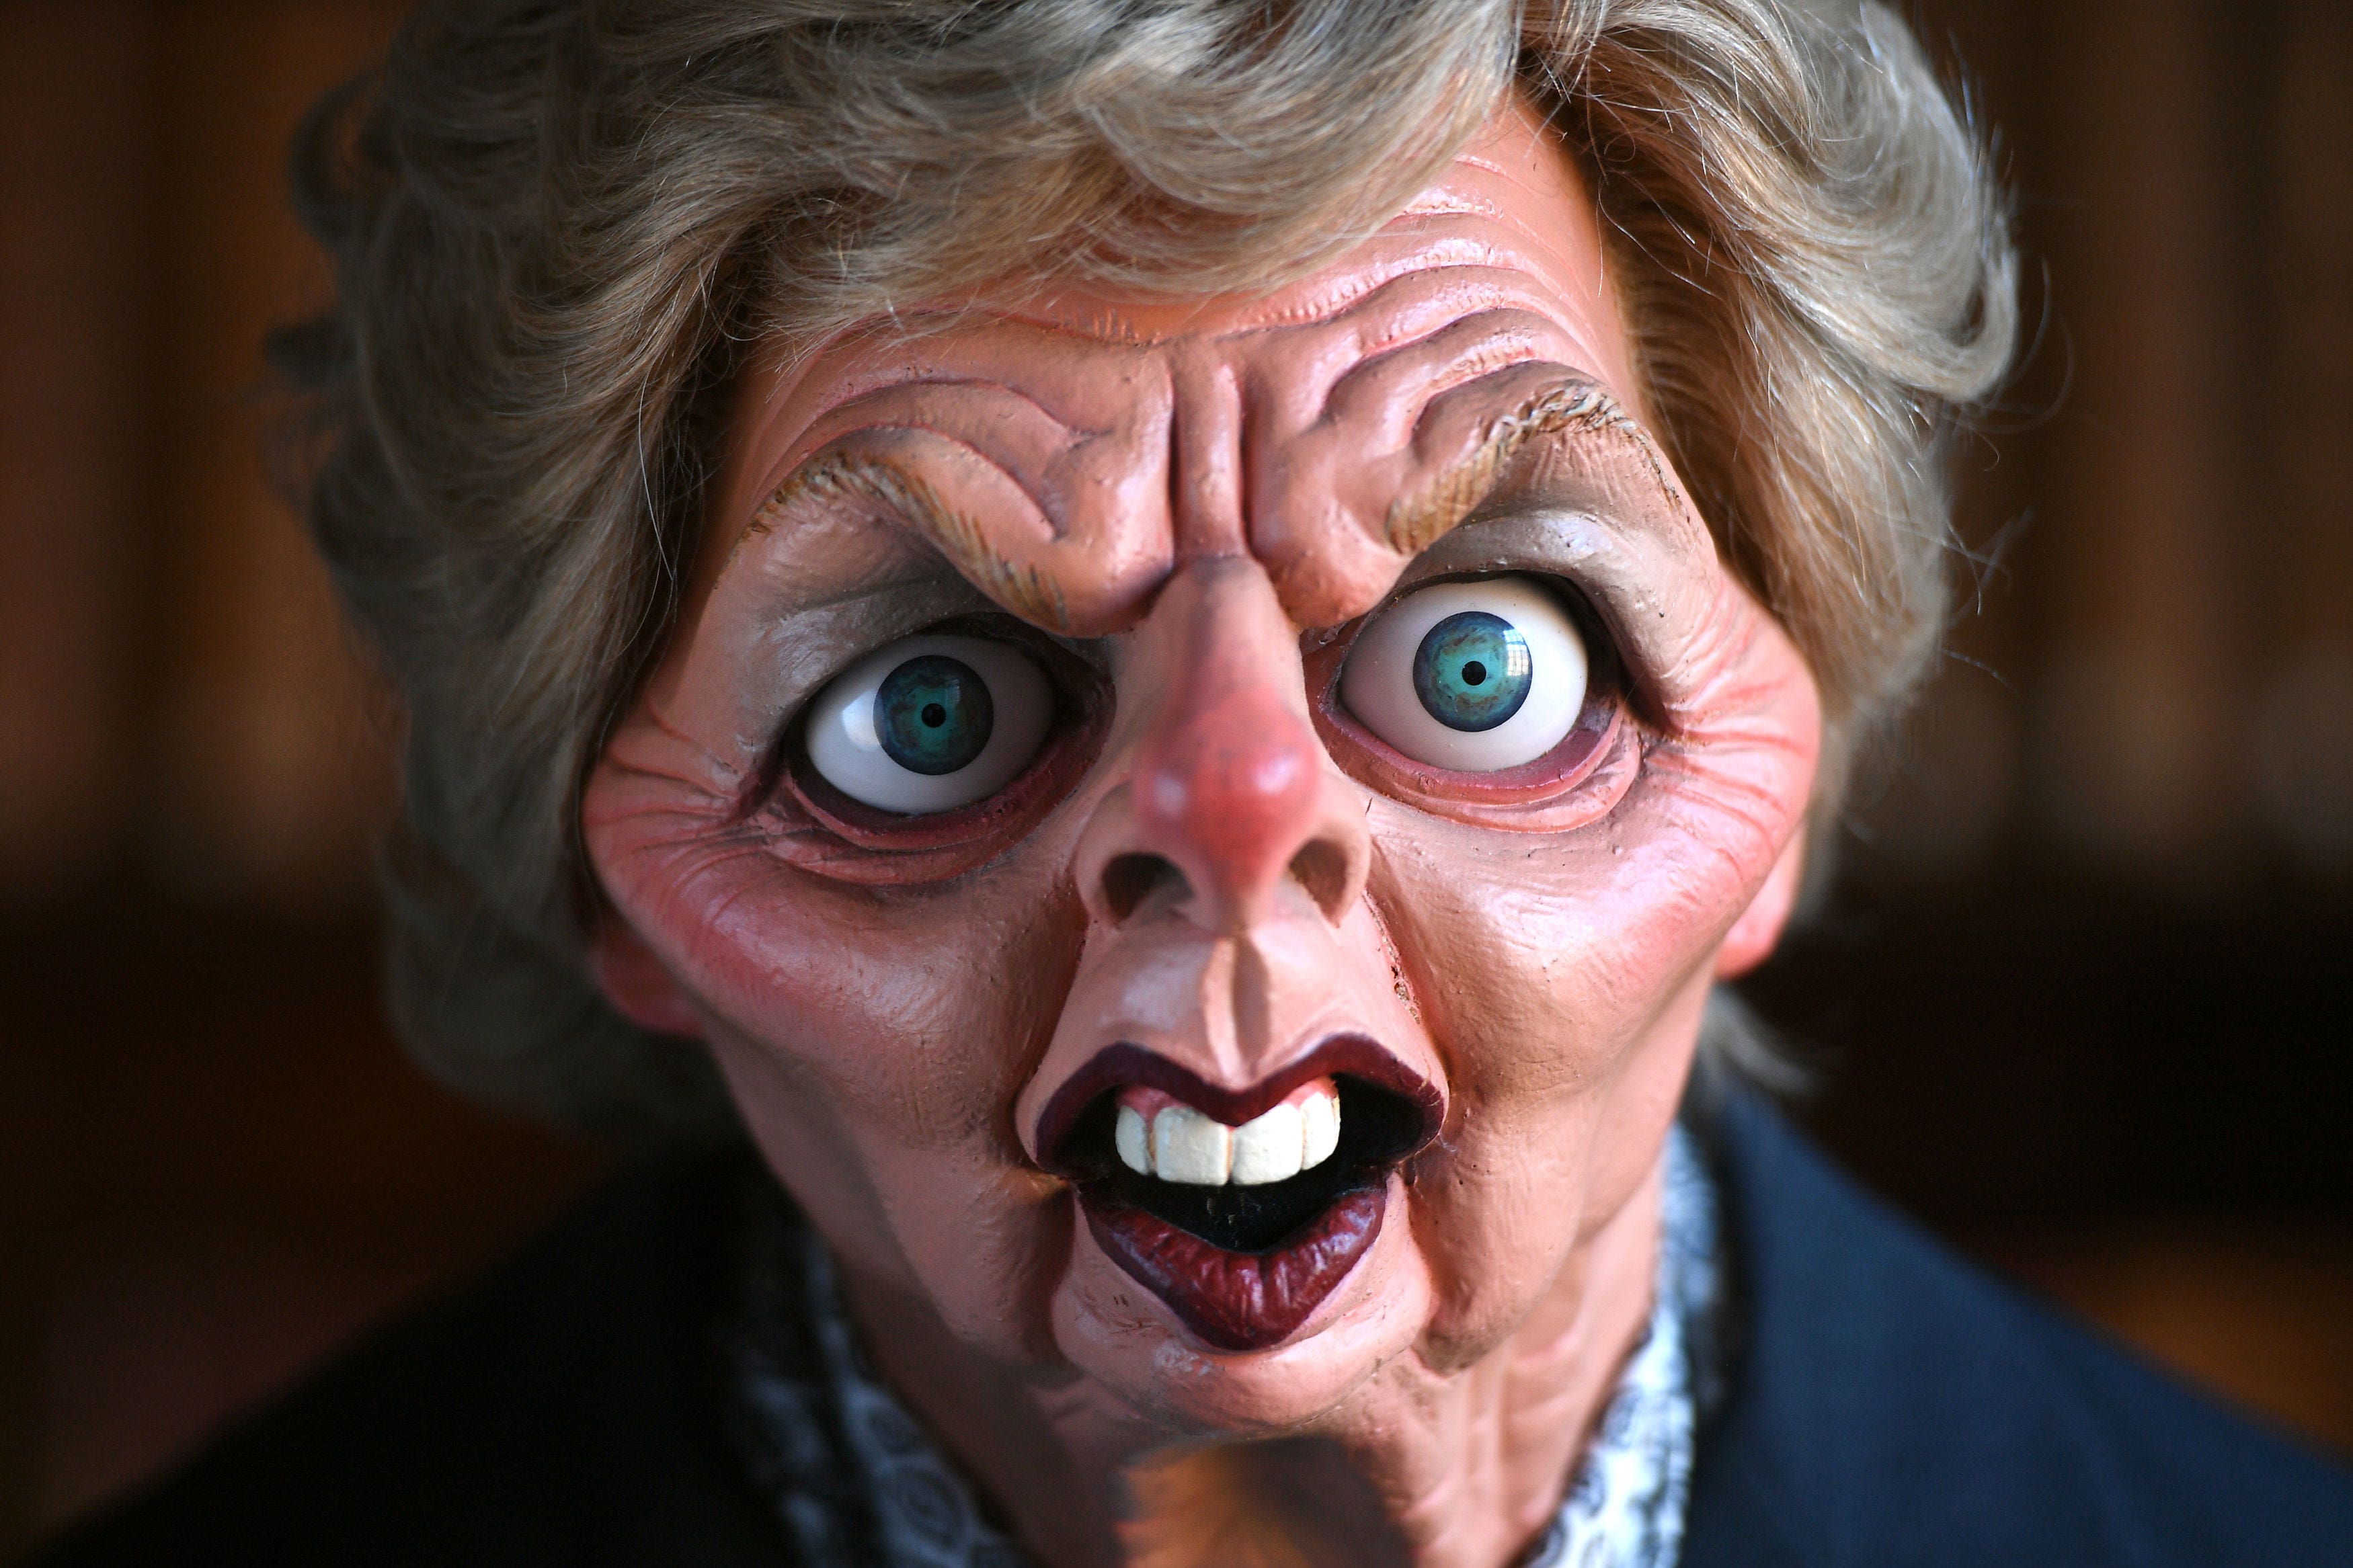 Spitting Image depicted Margaret Thatcher as a psychotic, tyrannical bully